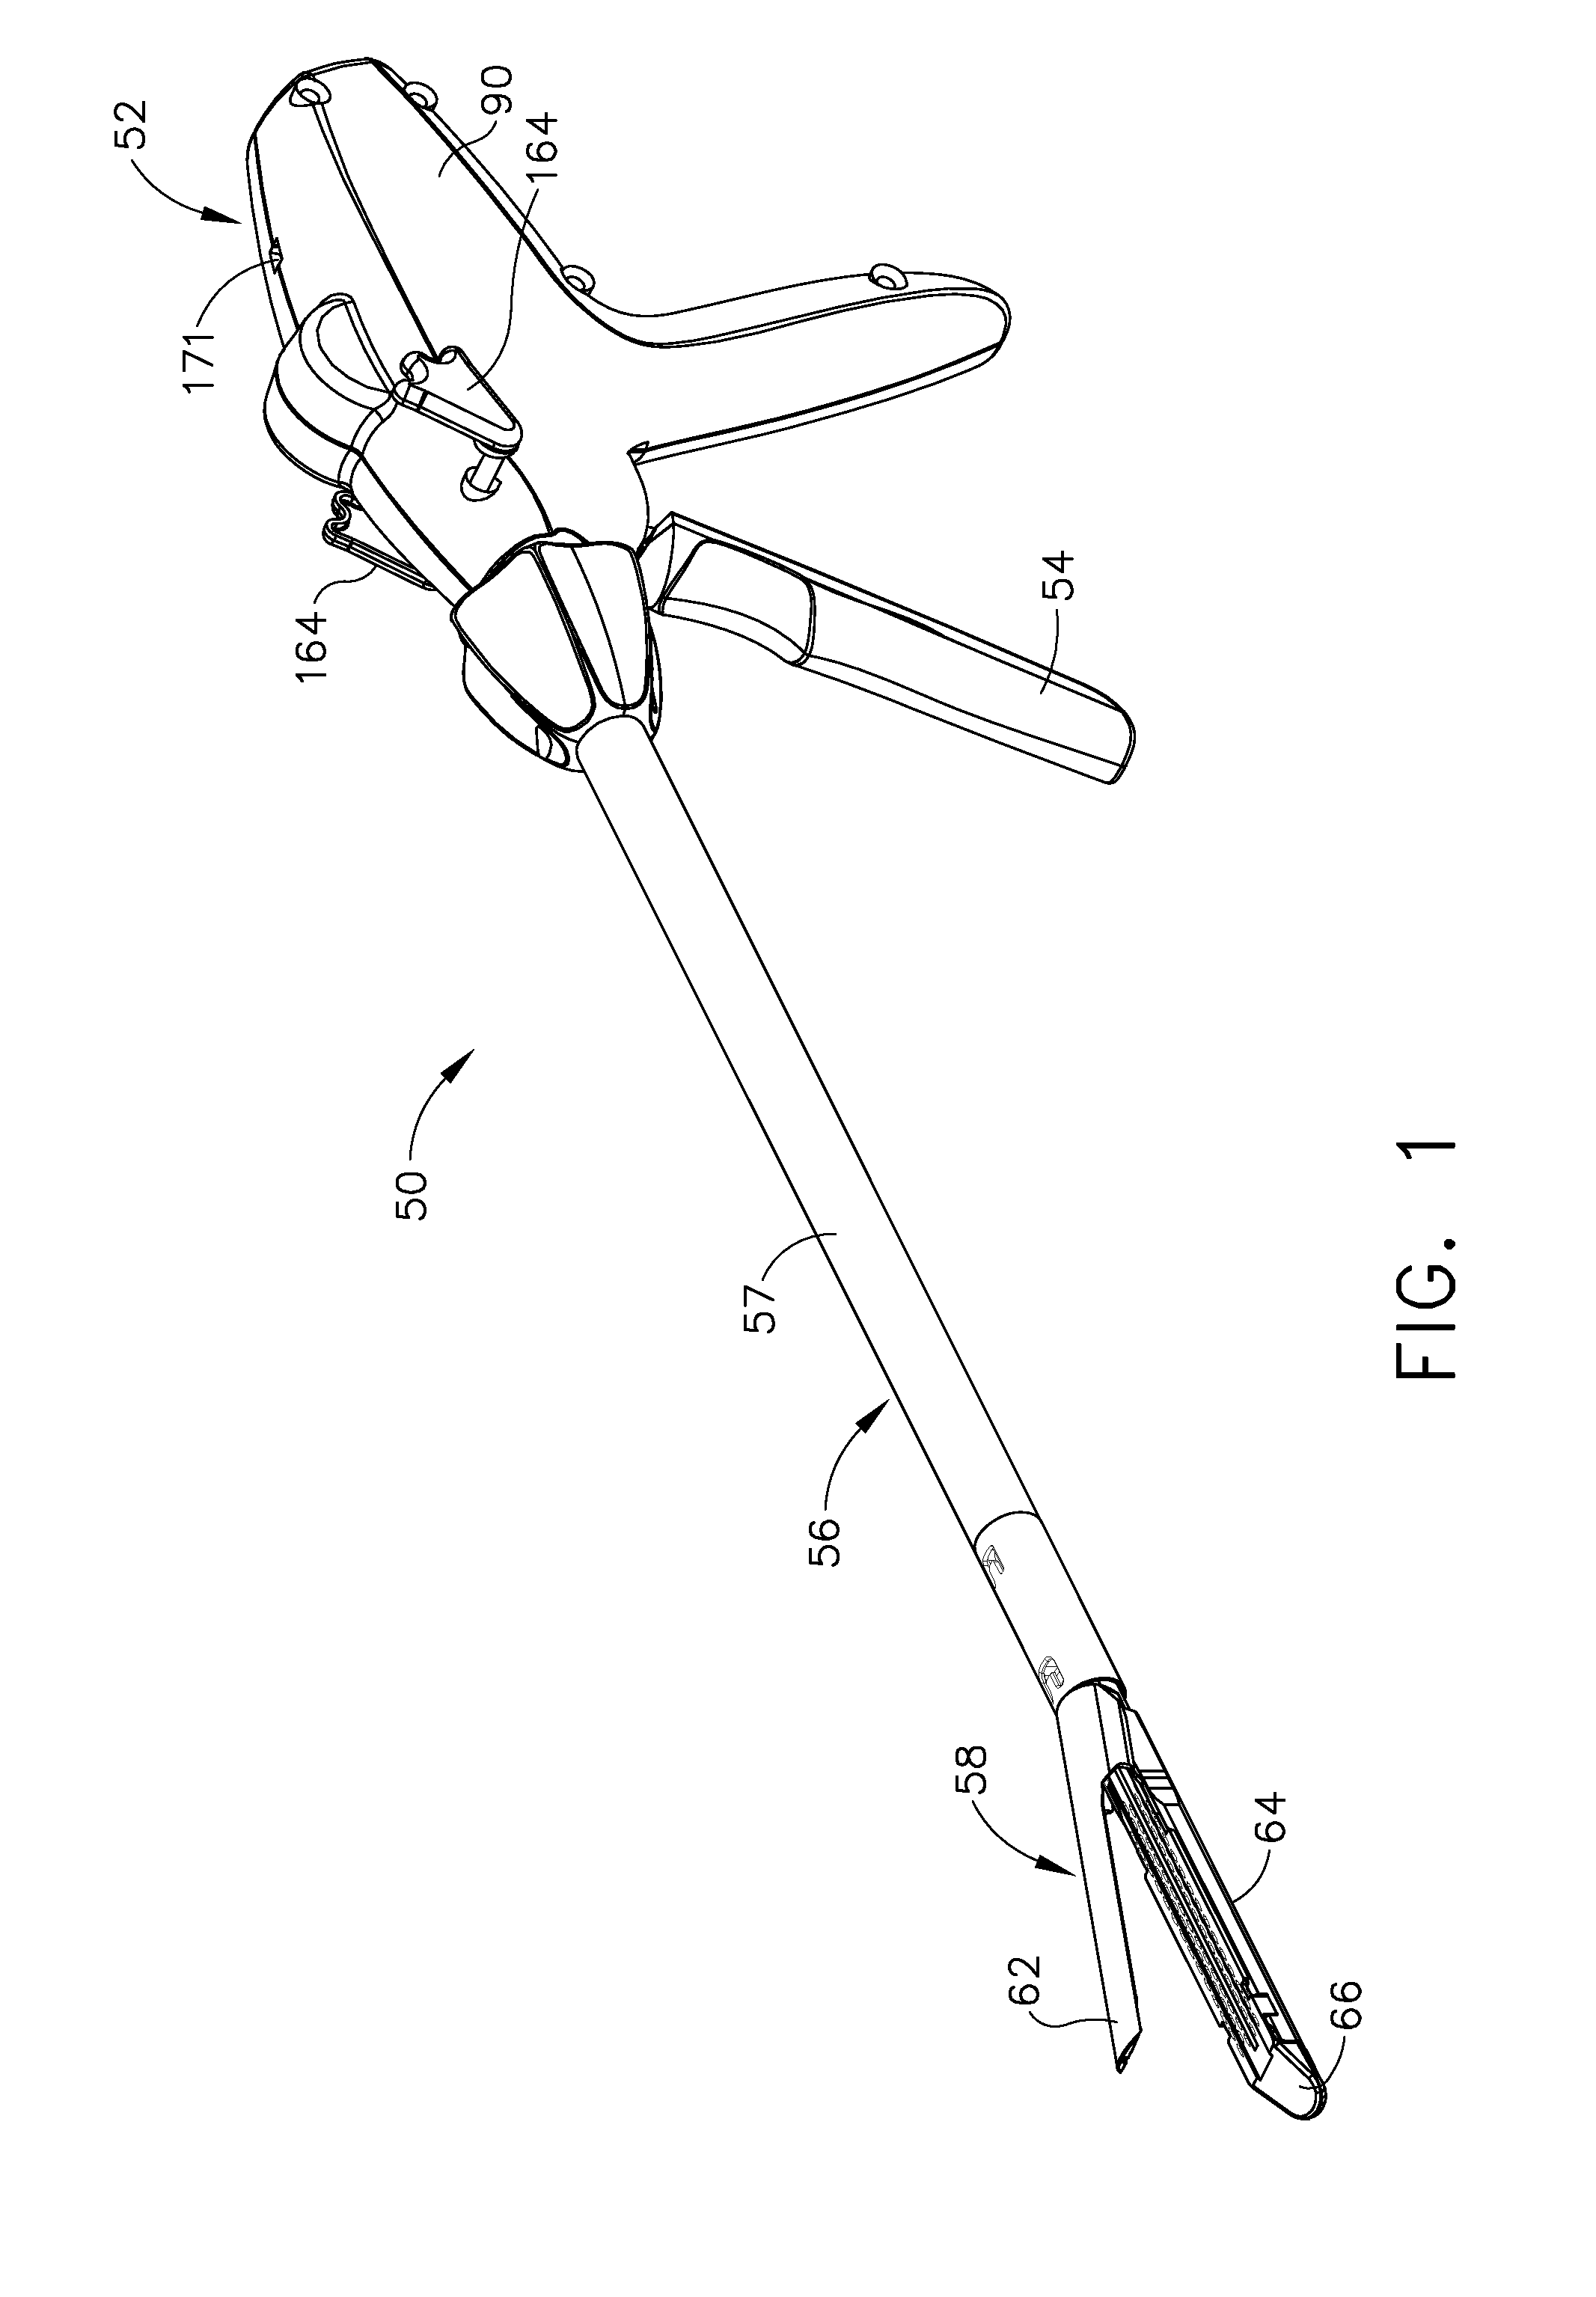 Surgical instrument having a multiple rate directional switching mechanism